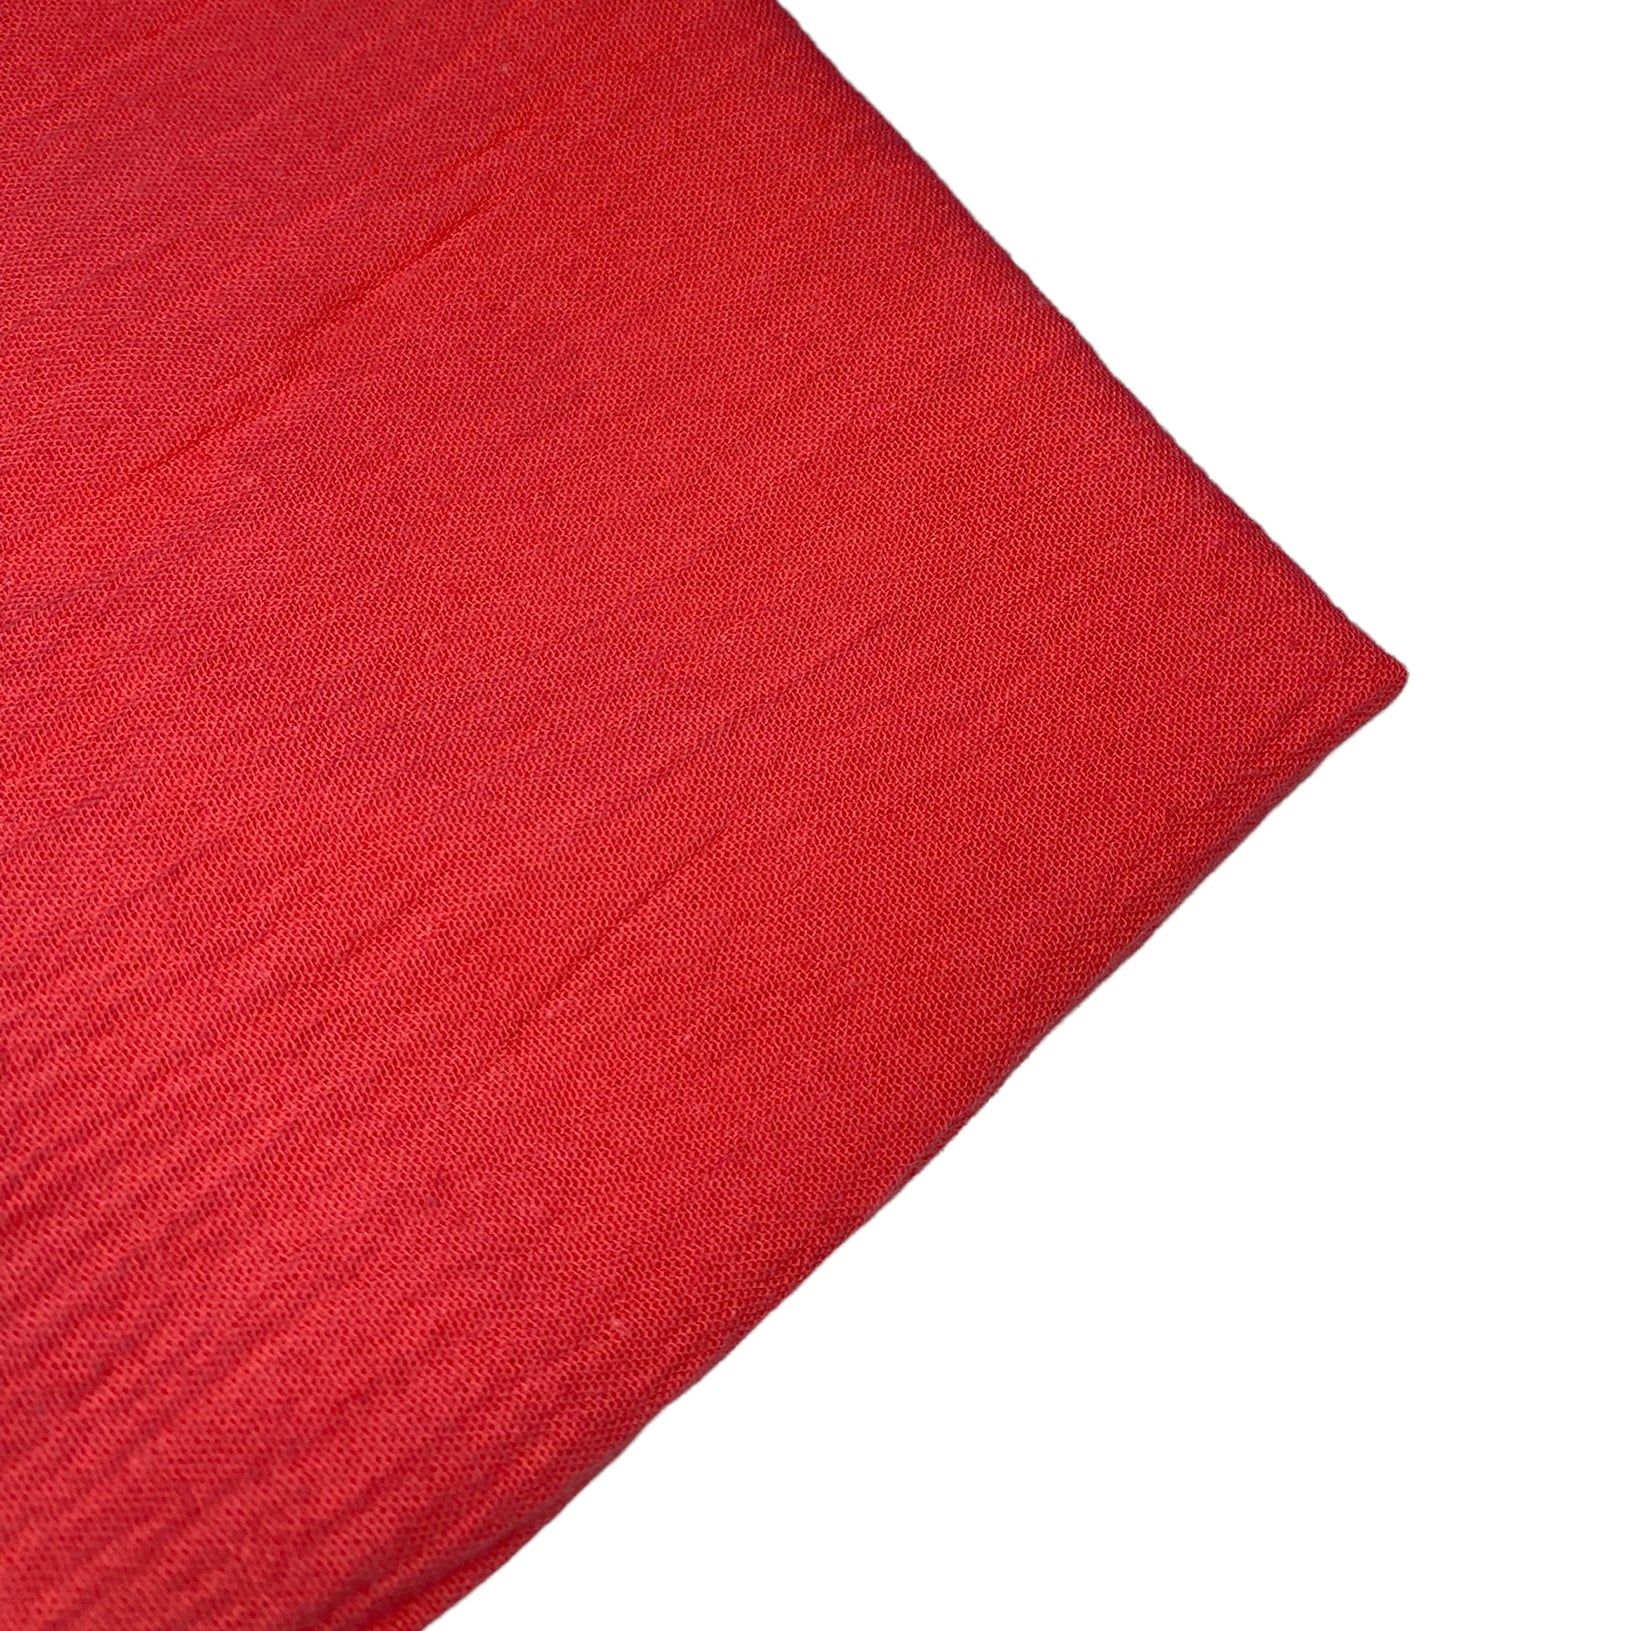 Crinkled Cotton - Coral Red